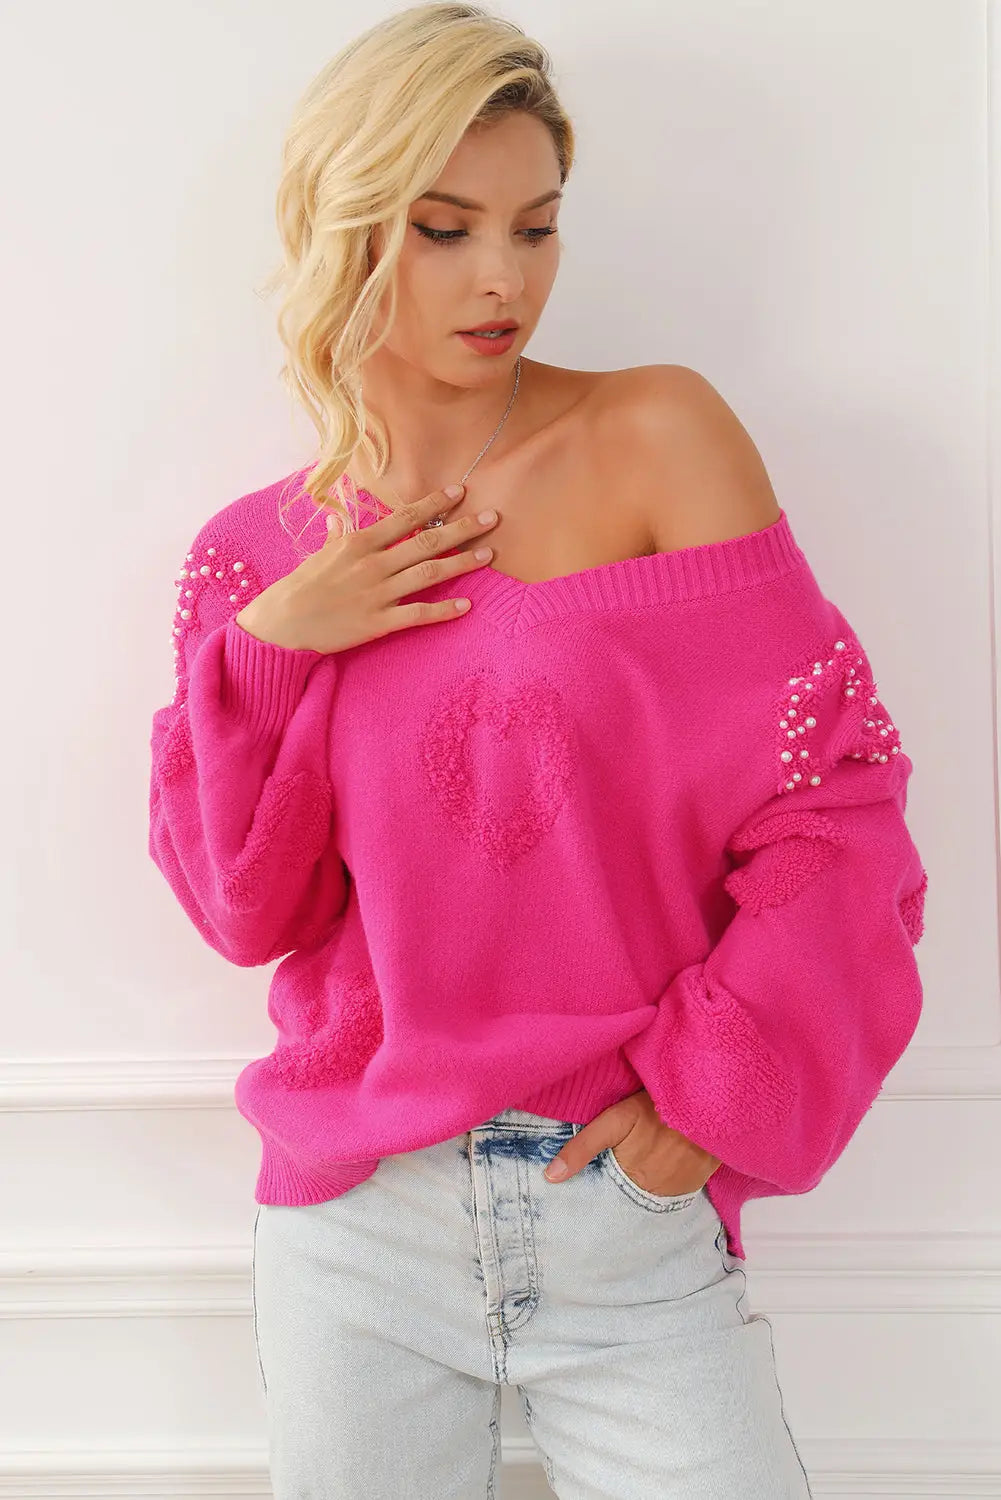 Rose red pearl embellished fuzzy hearts v neck sweater - sweaters & cardigans